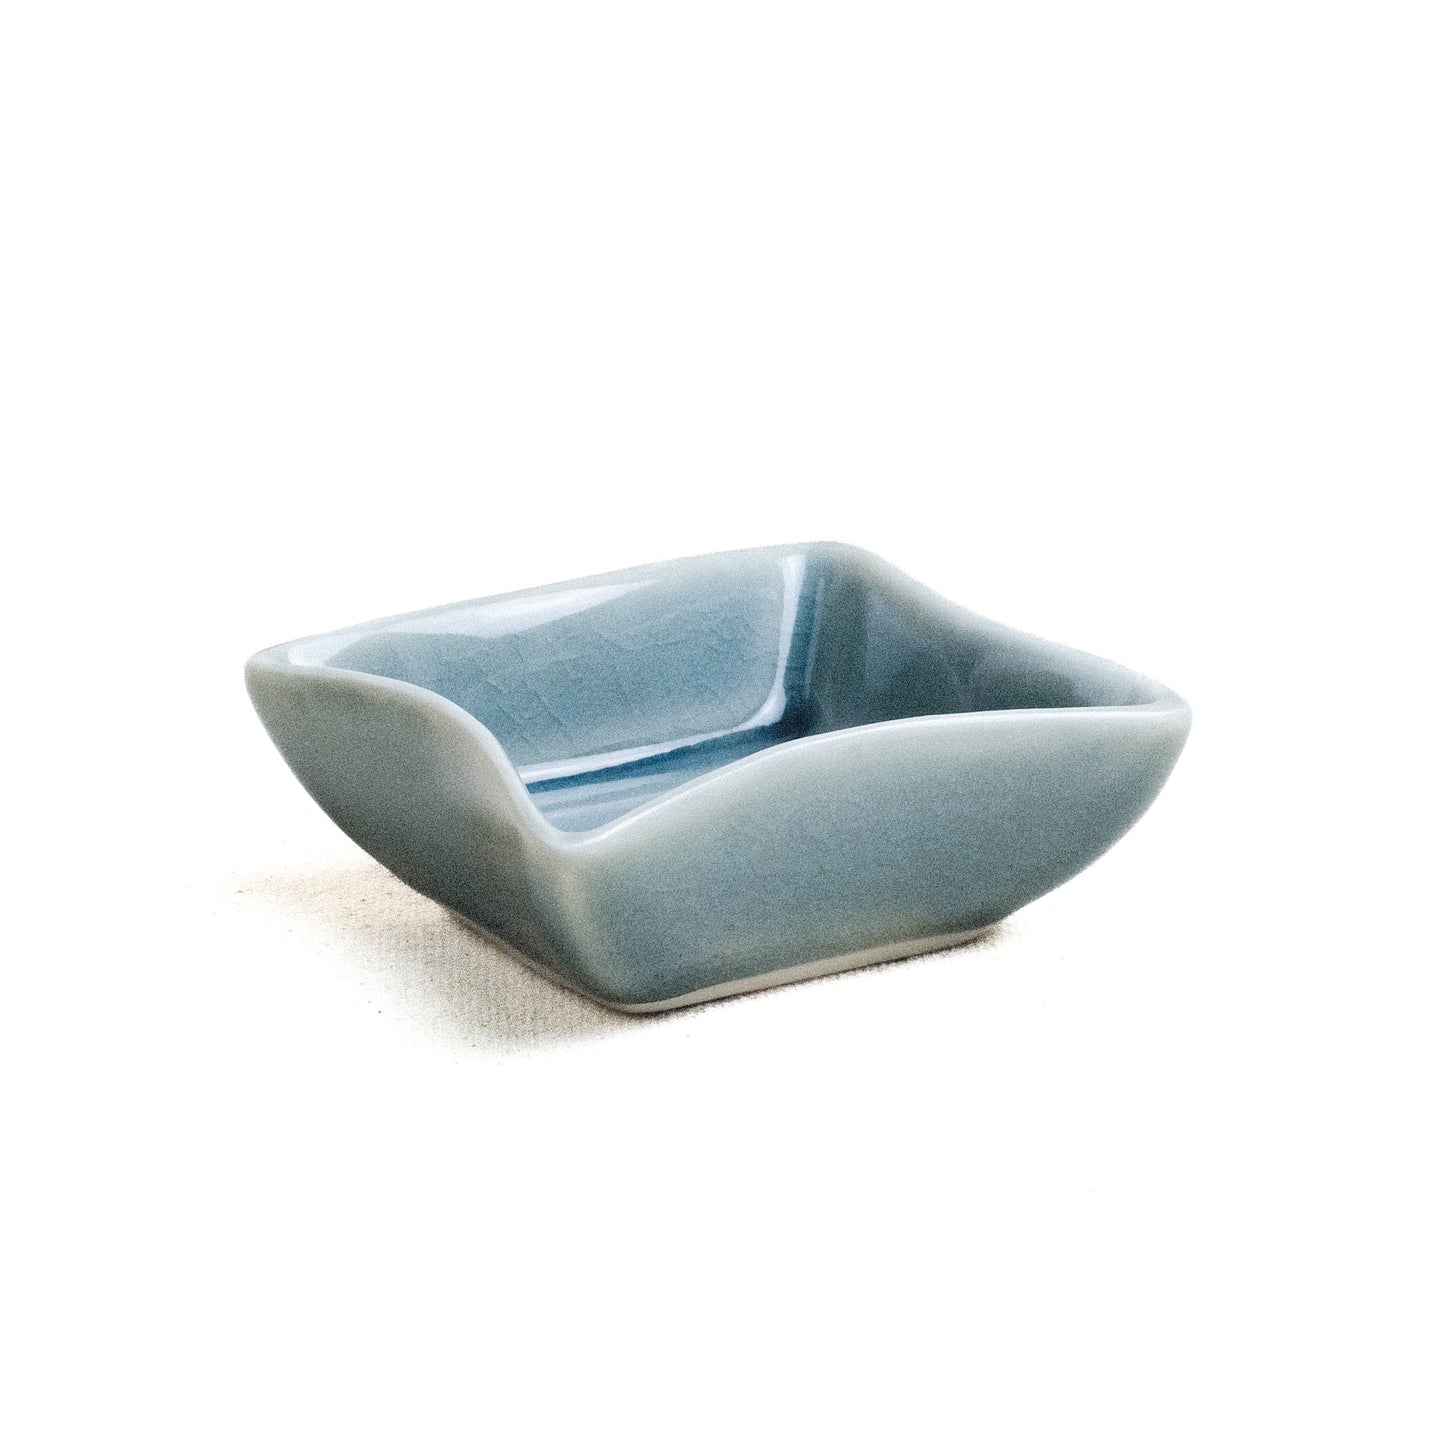 Dipping bowl, square